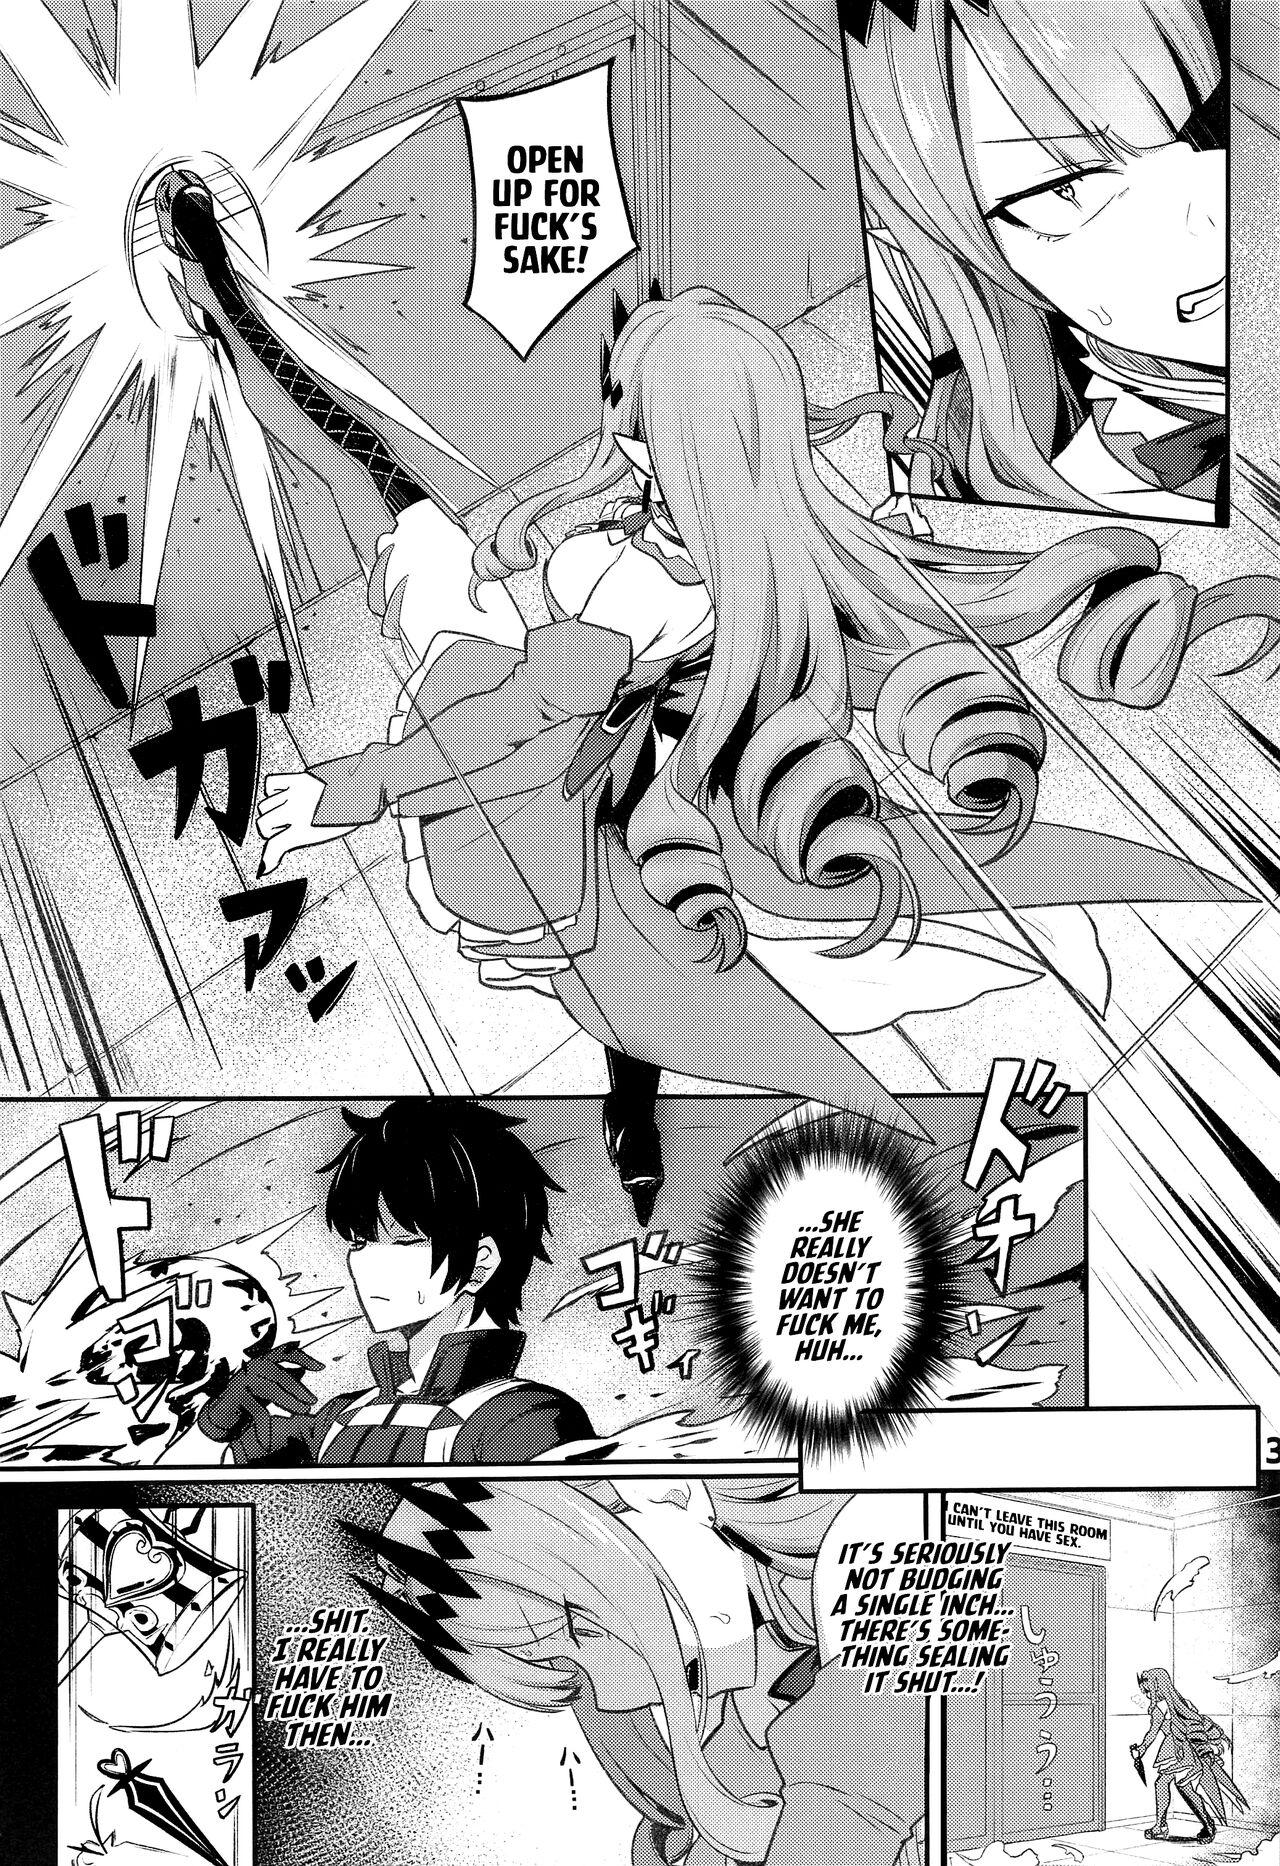 Pinoy Baobhan Sith to SEX Shinai to Derarenai Heya | Baobhan Sith and I Need to Have Sex or Else We Can't Leave This Room! - Fate grand order Women Sucking - Page 4